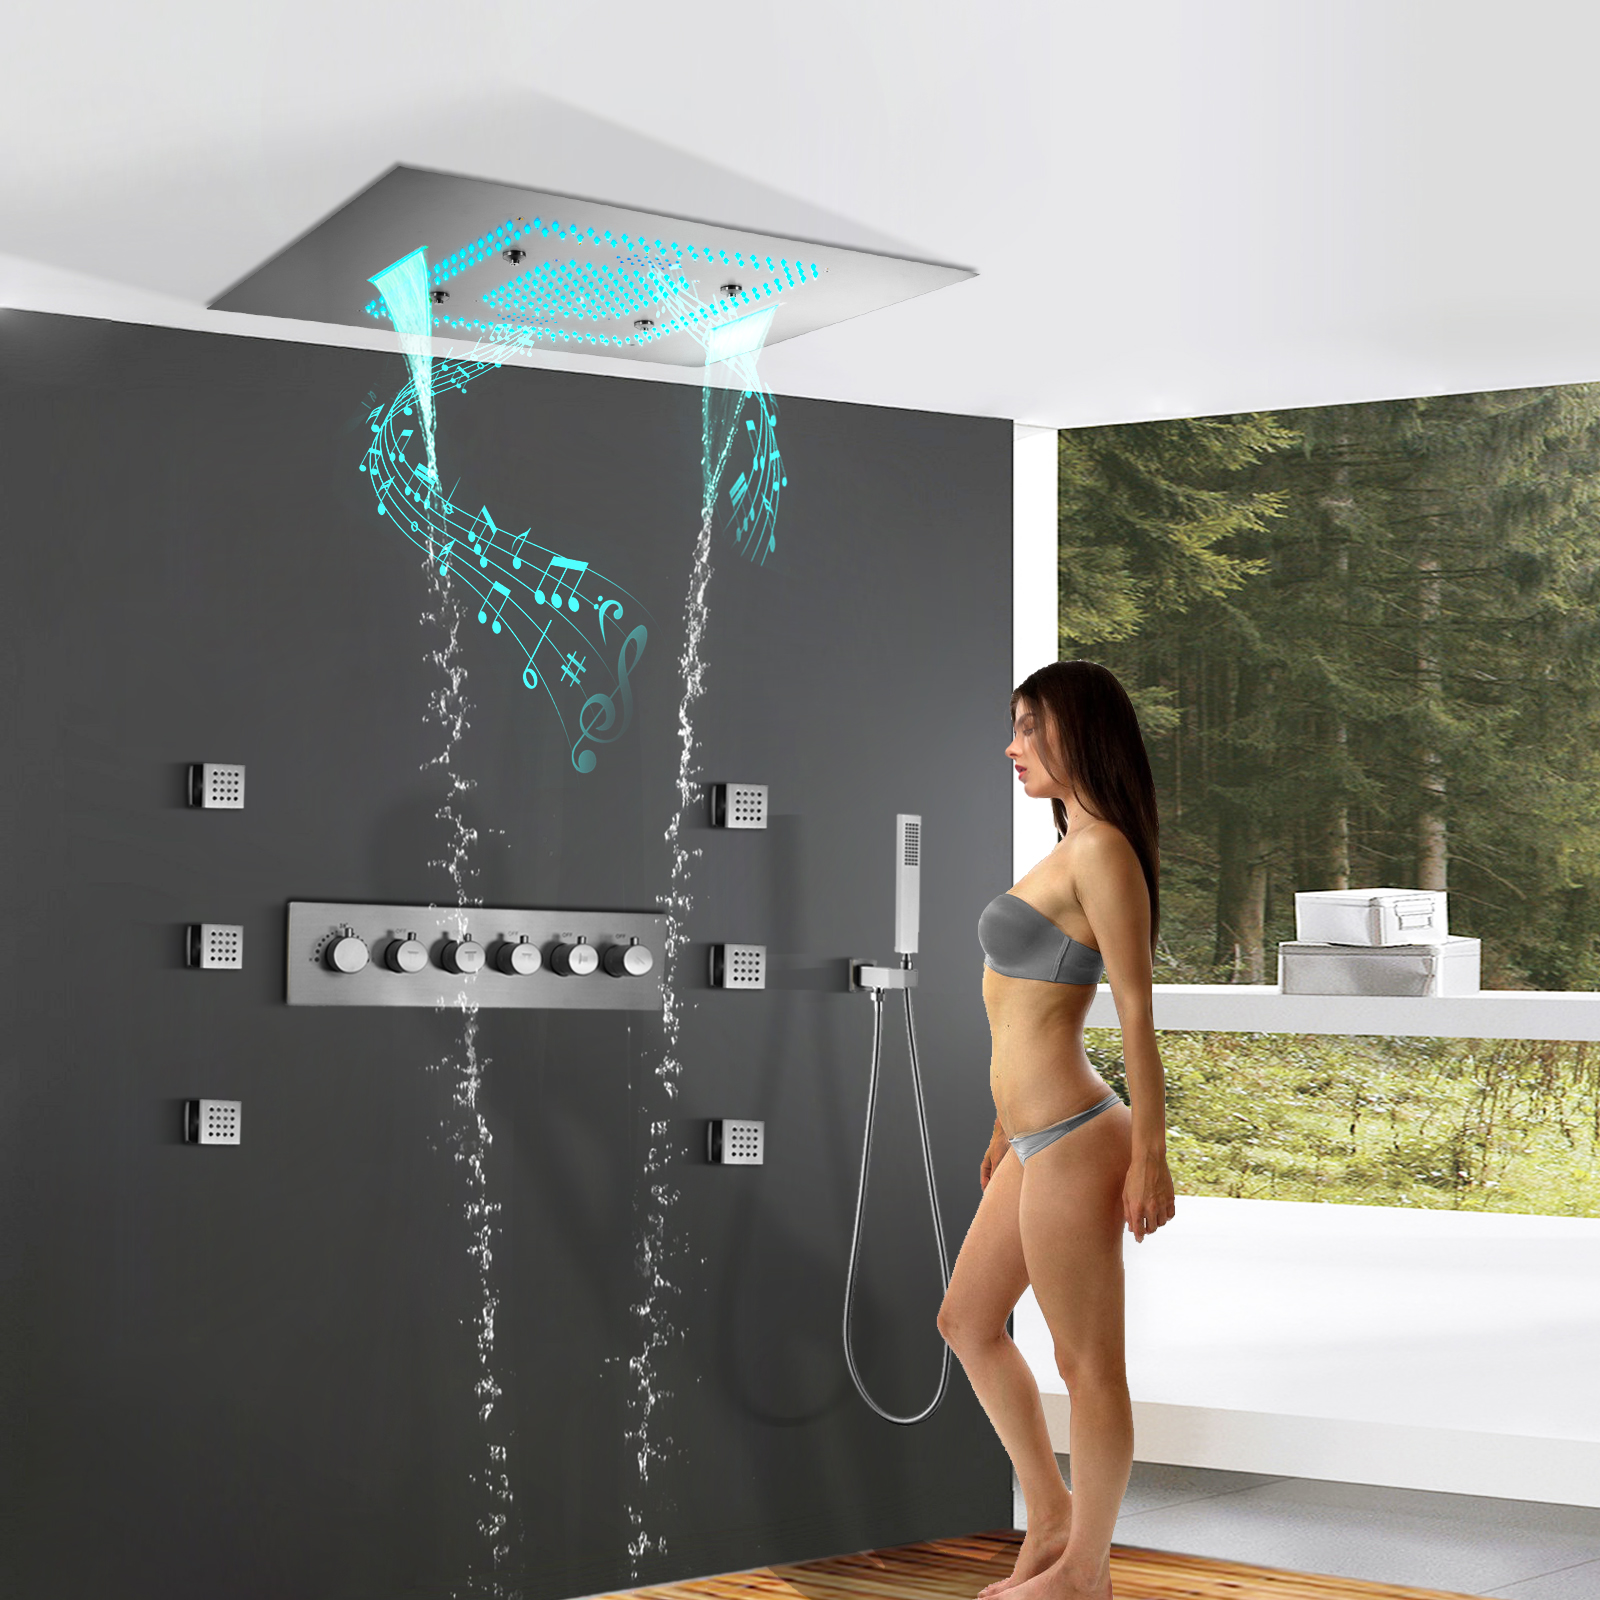 Ceiling Embedded 600*800mm Led Shower Head With Music Speakers Thermostatic Main Body Bathroom Shower Faucet